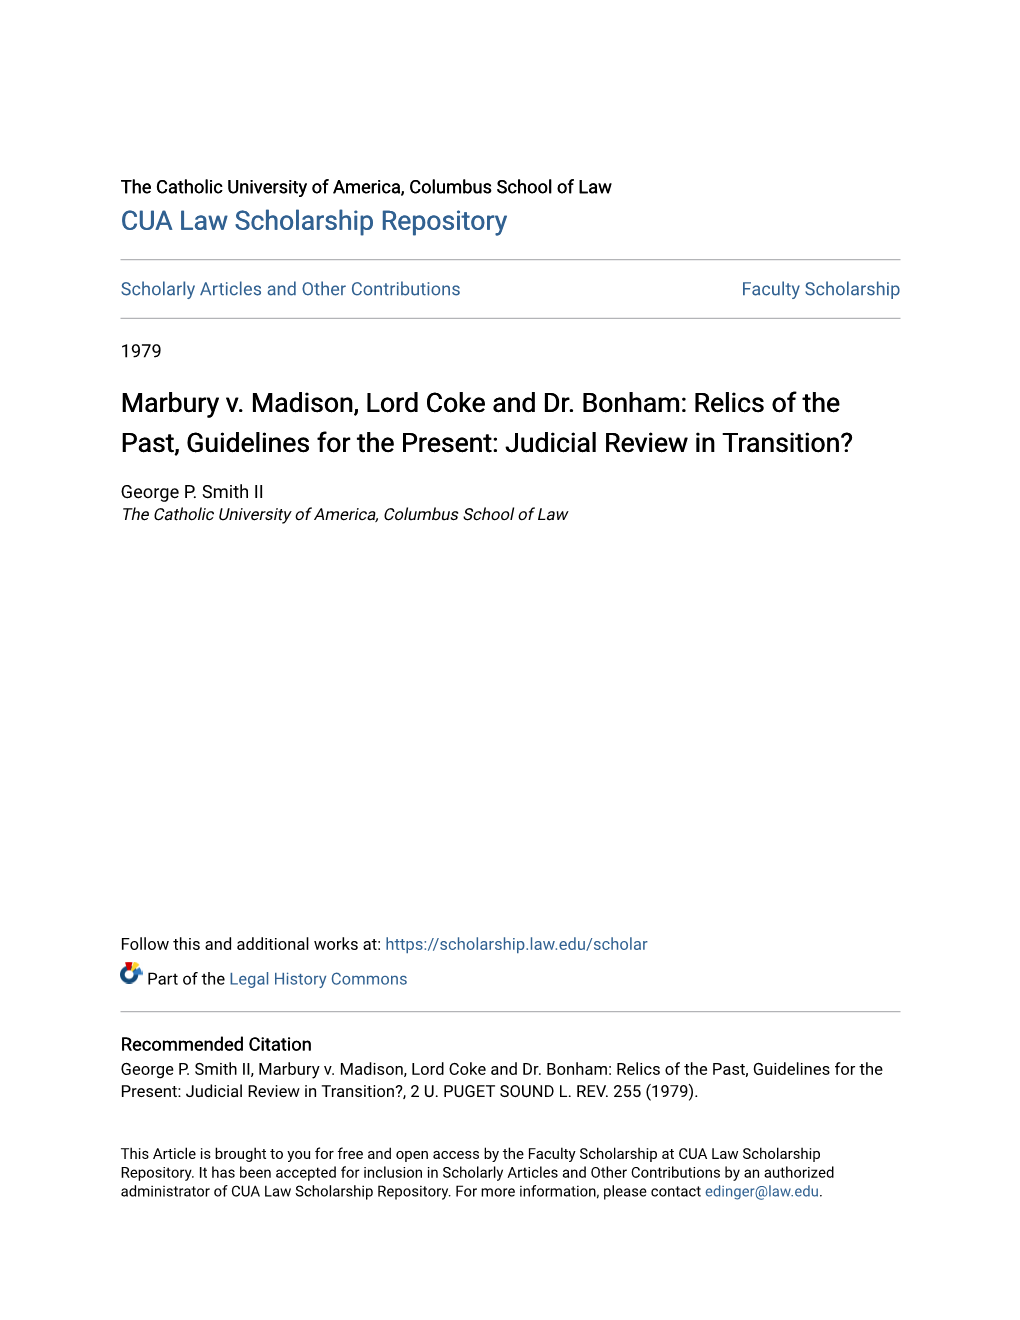 Marbury V. Madison, Lord Coke and Dr. Bonham: Relics of the Past, Guidelines for the Present: Judicial Review in Transition?